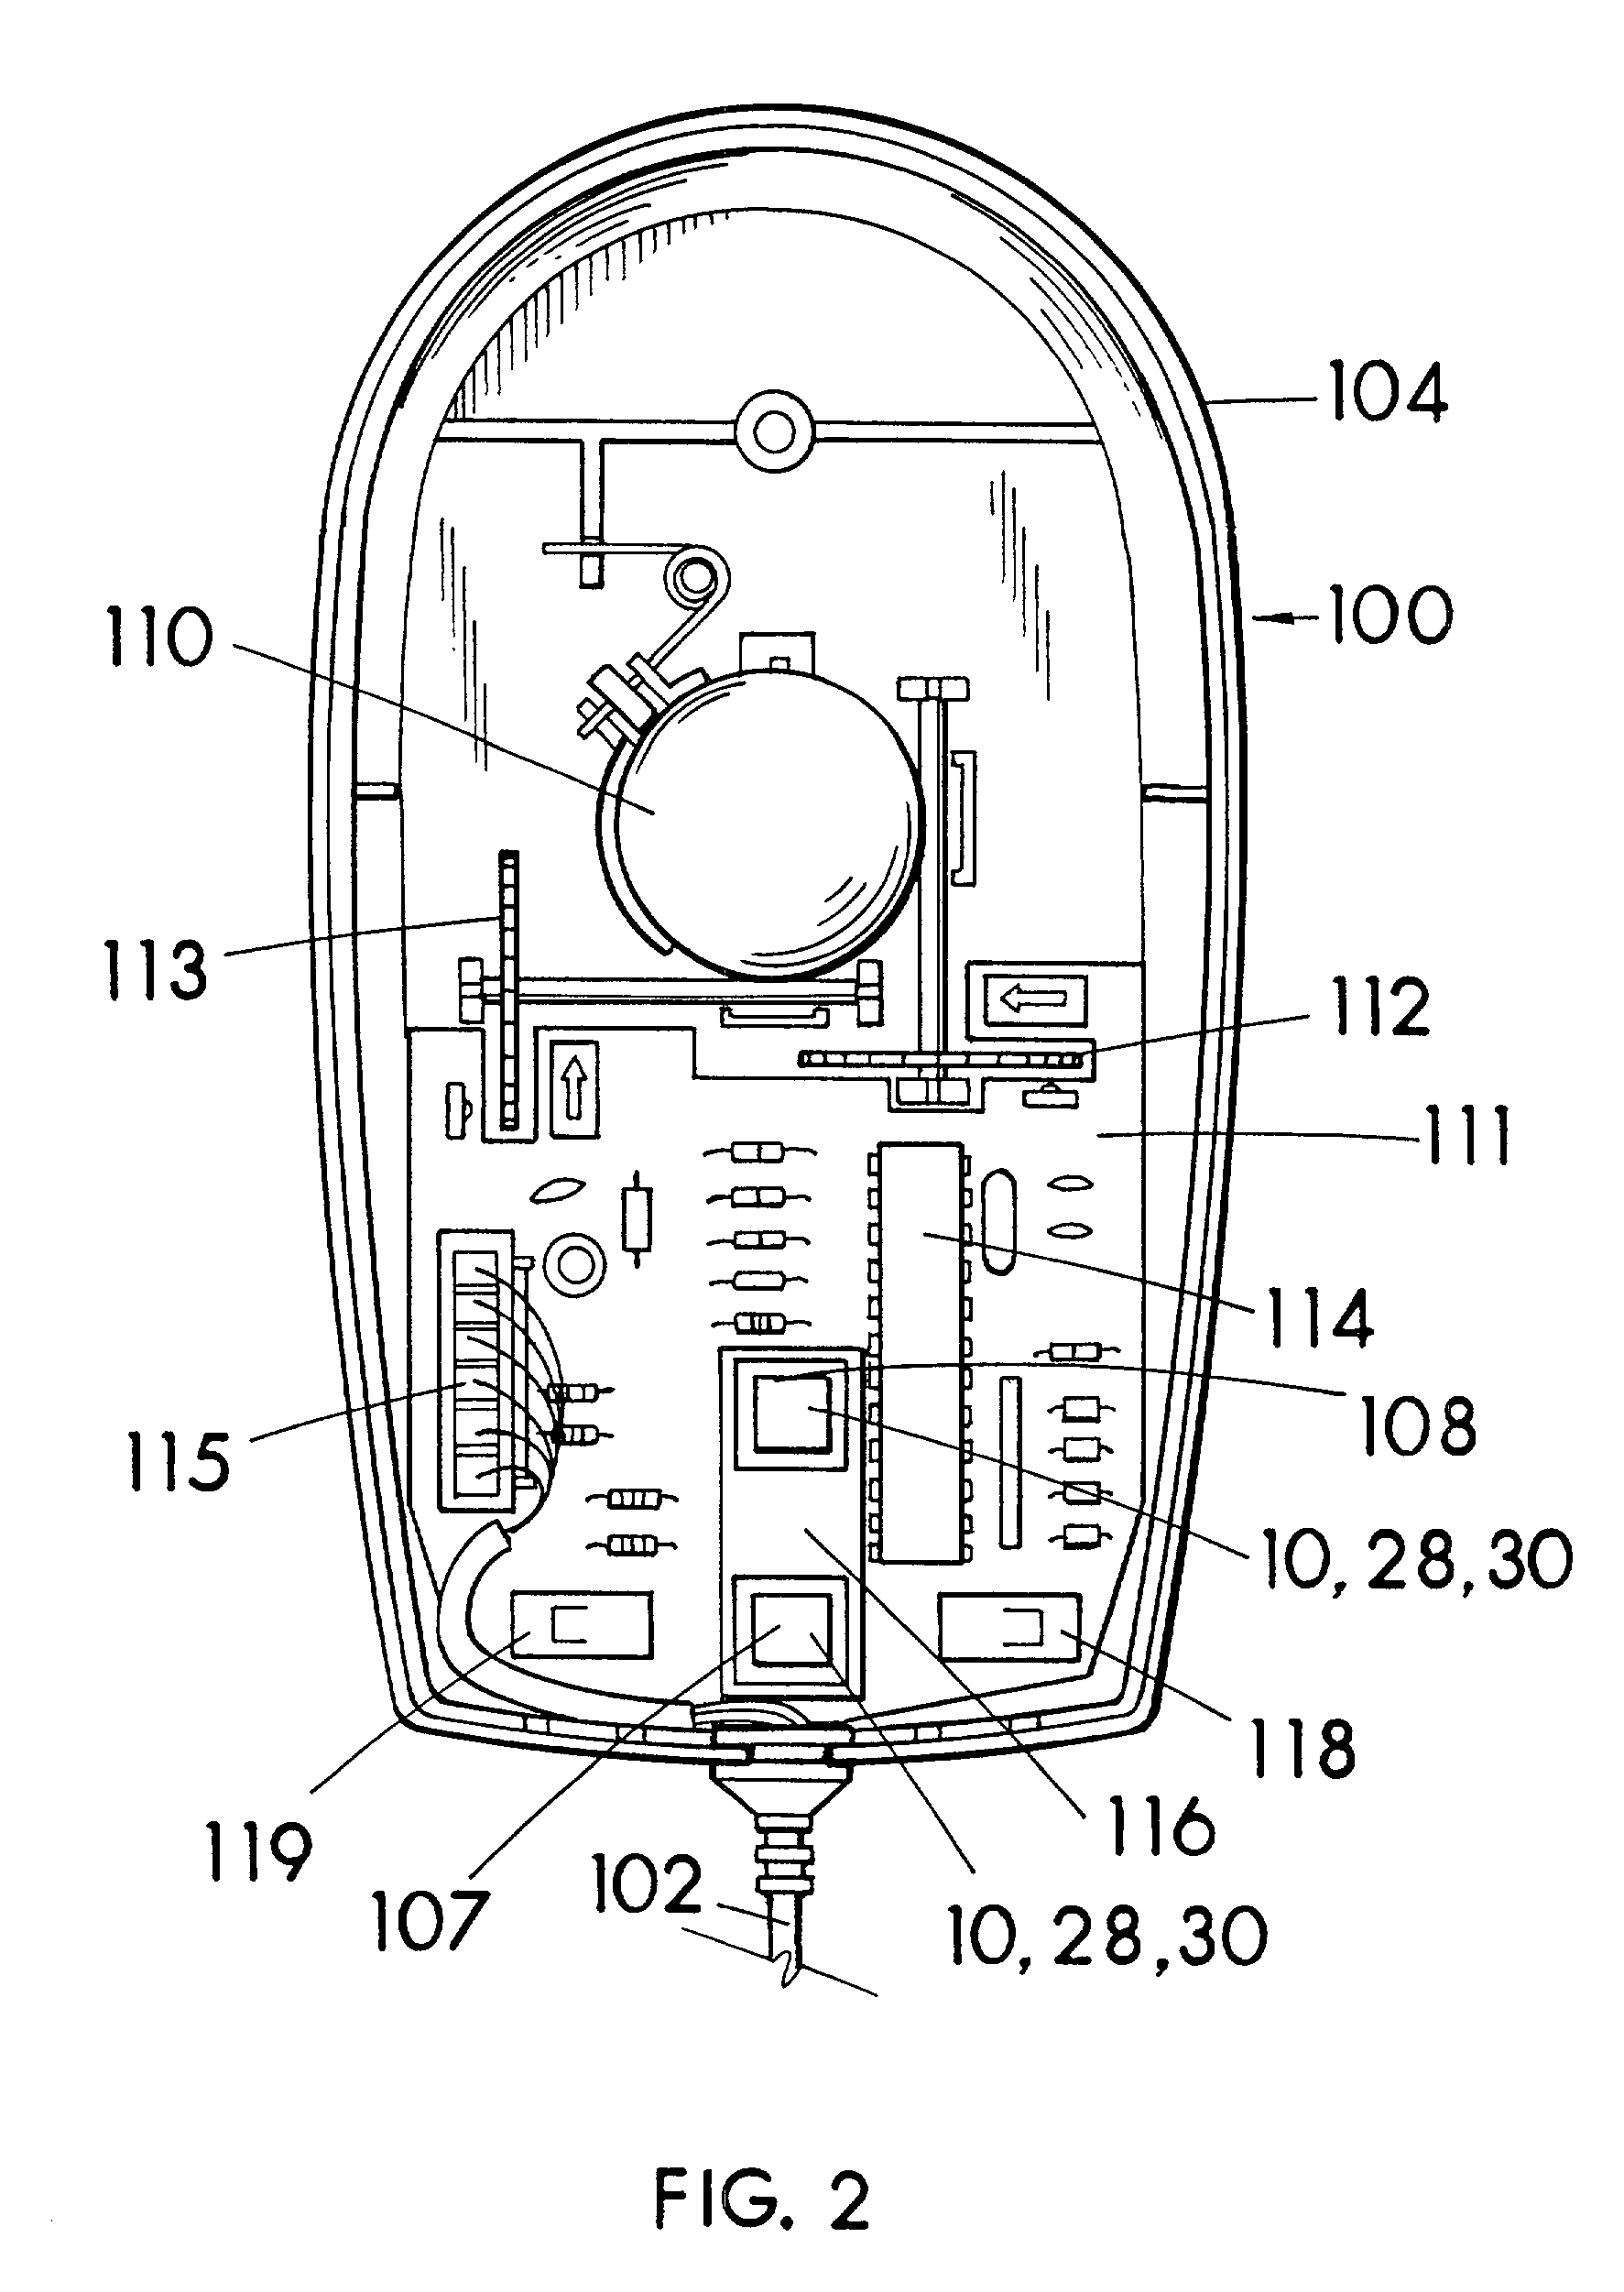 Computer mouse with specialized button(s)